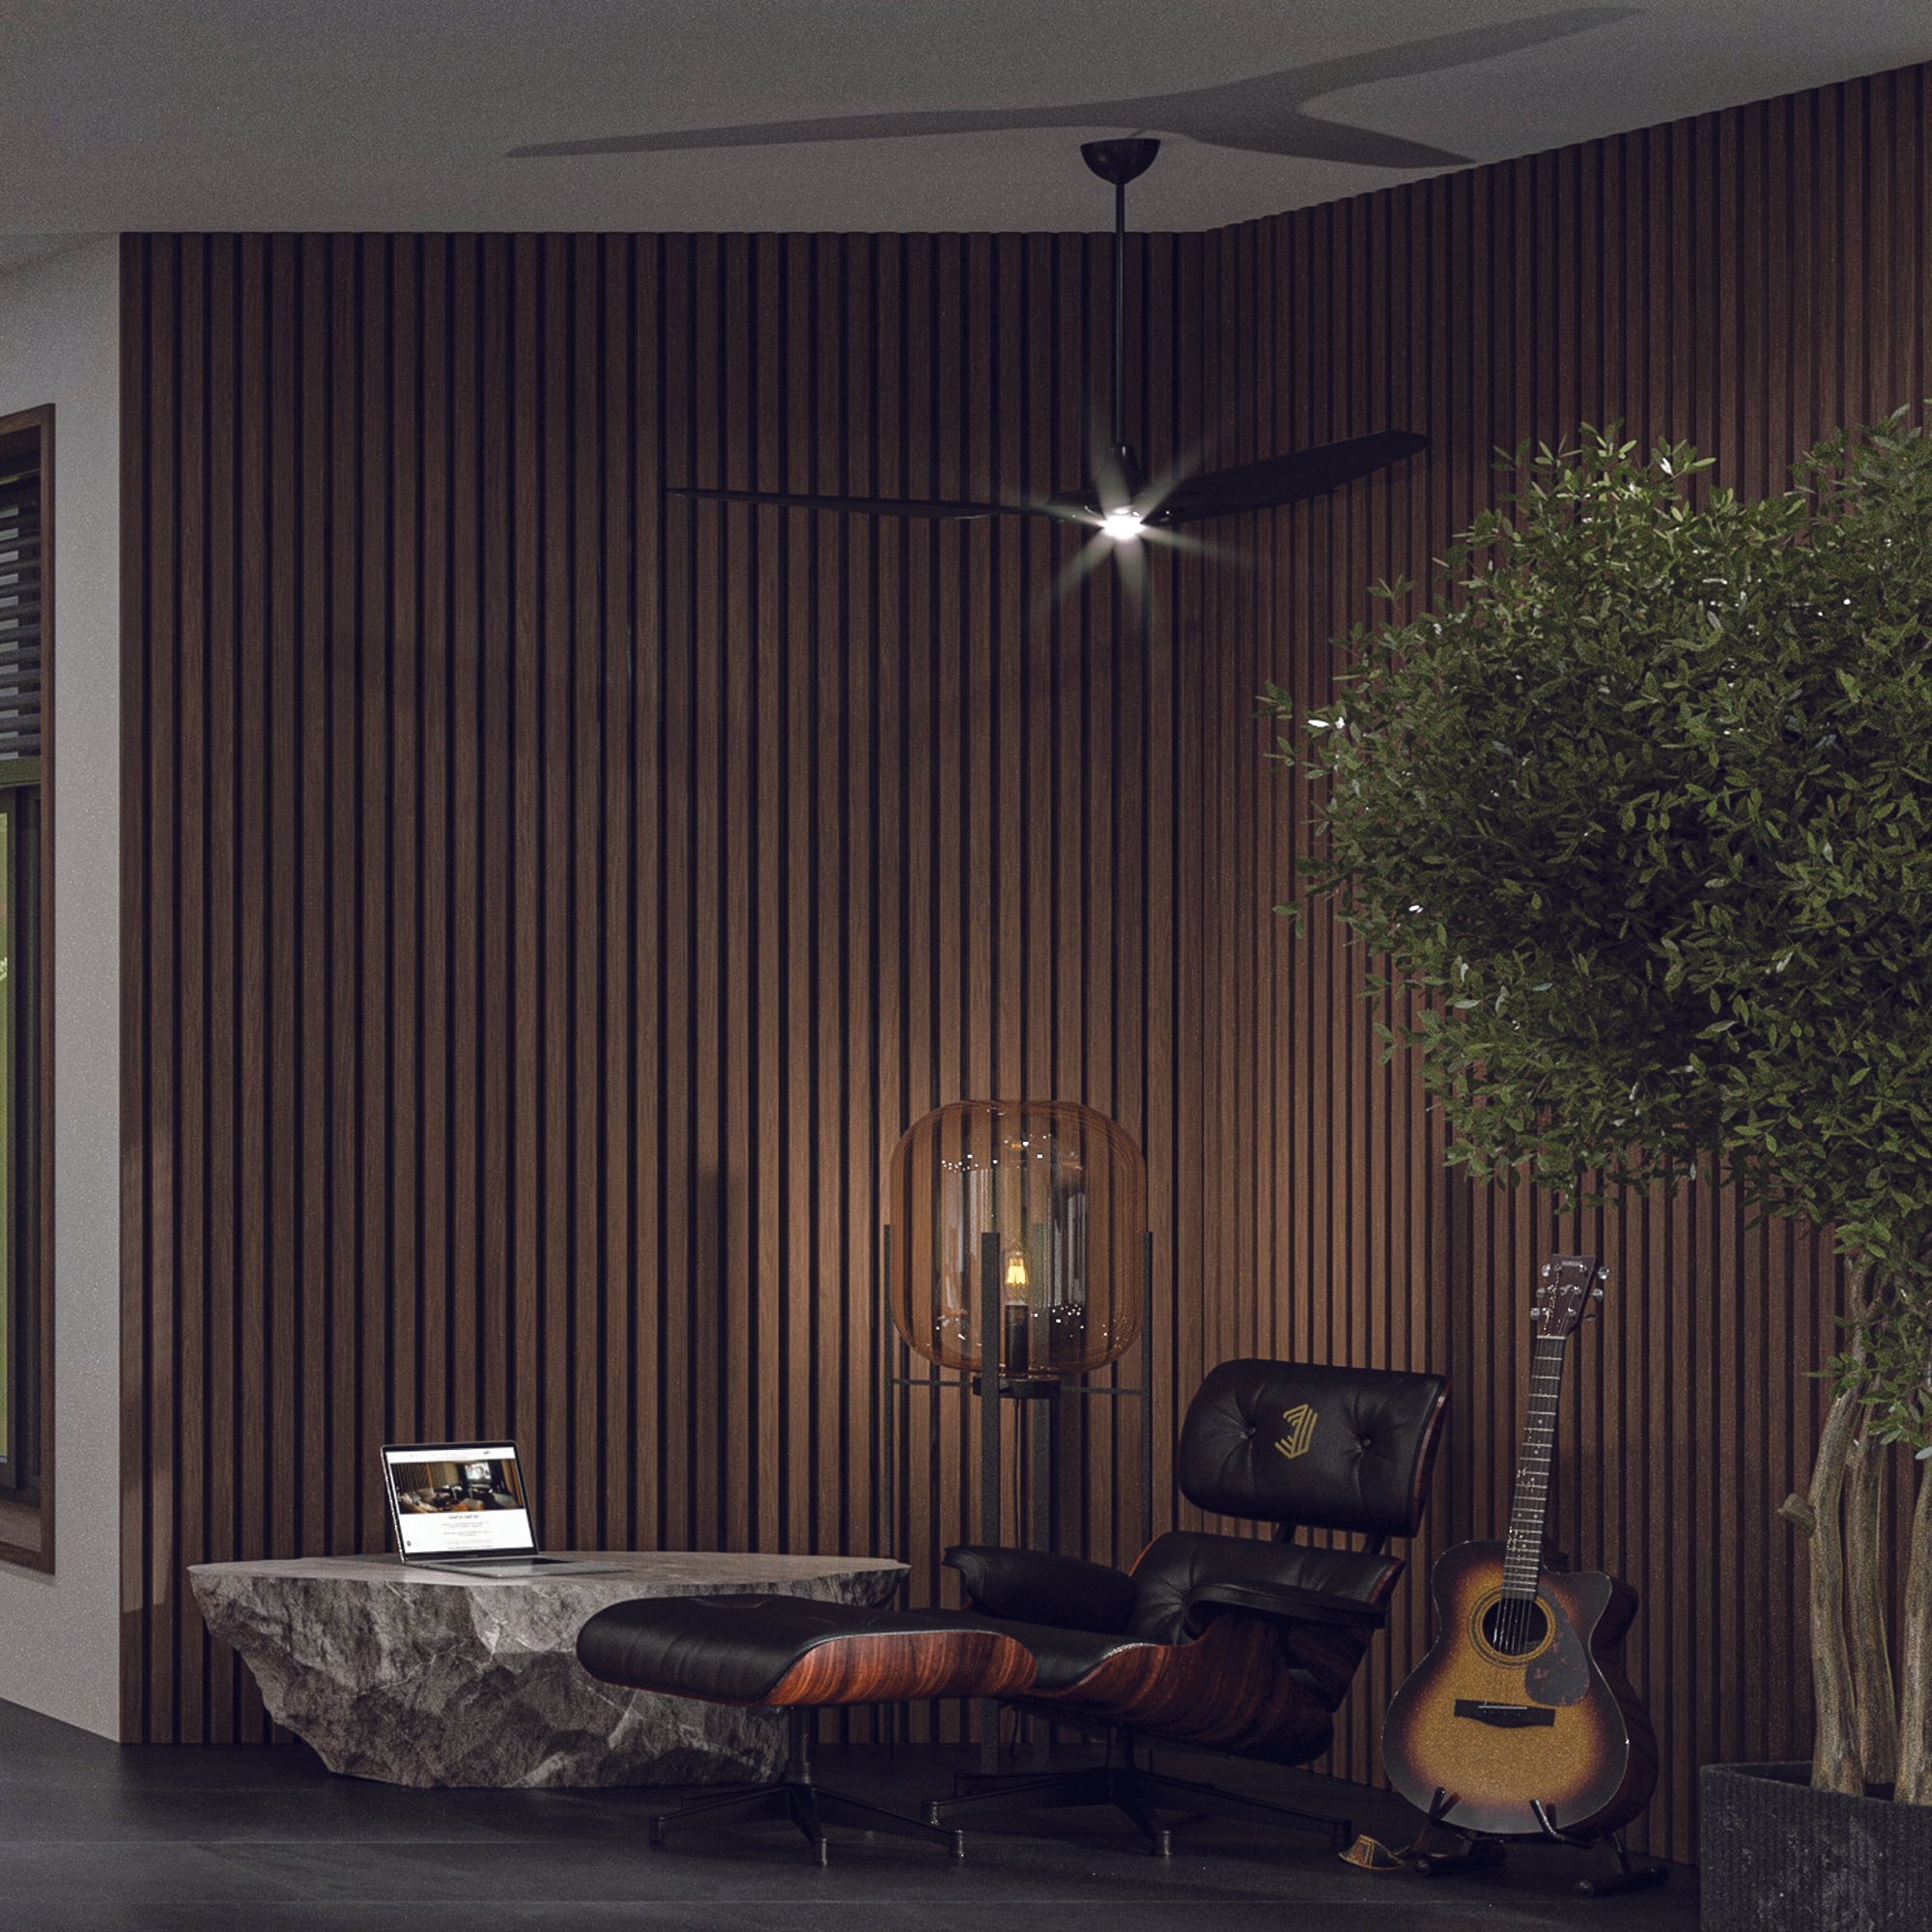 Acoustic wood wall panels with guitar and leather chair